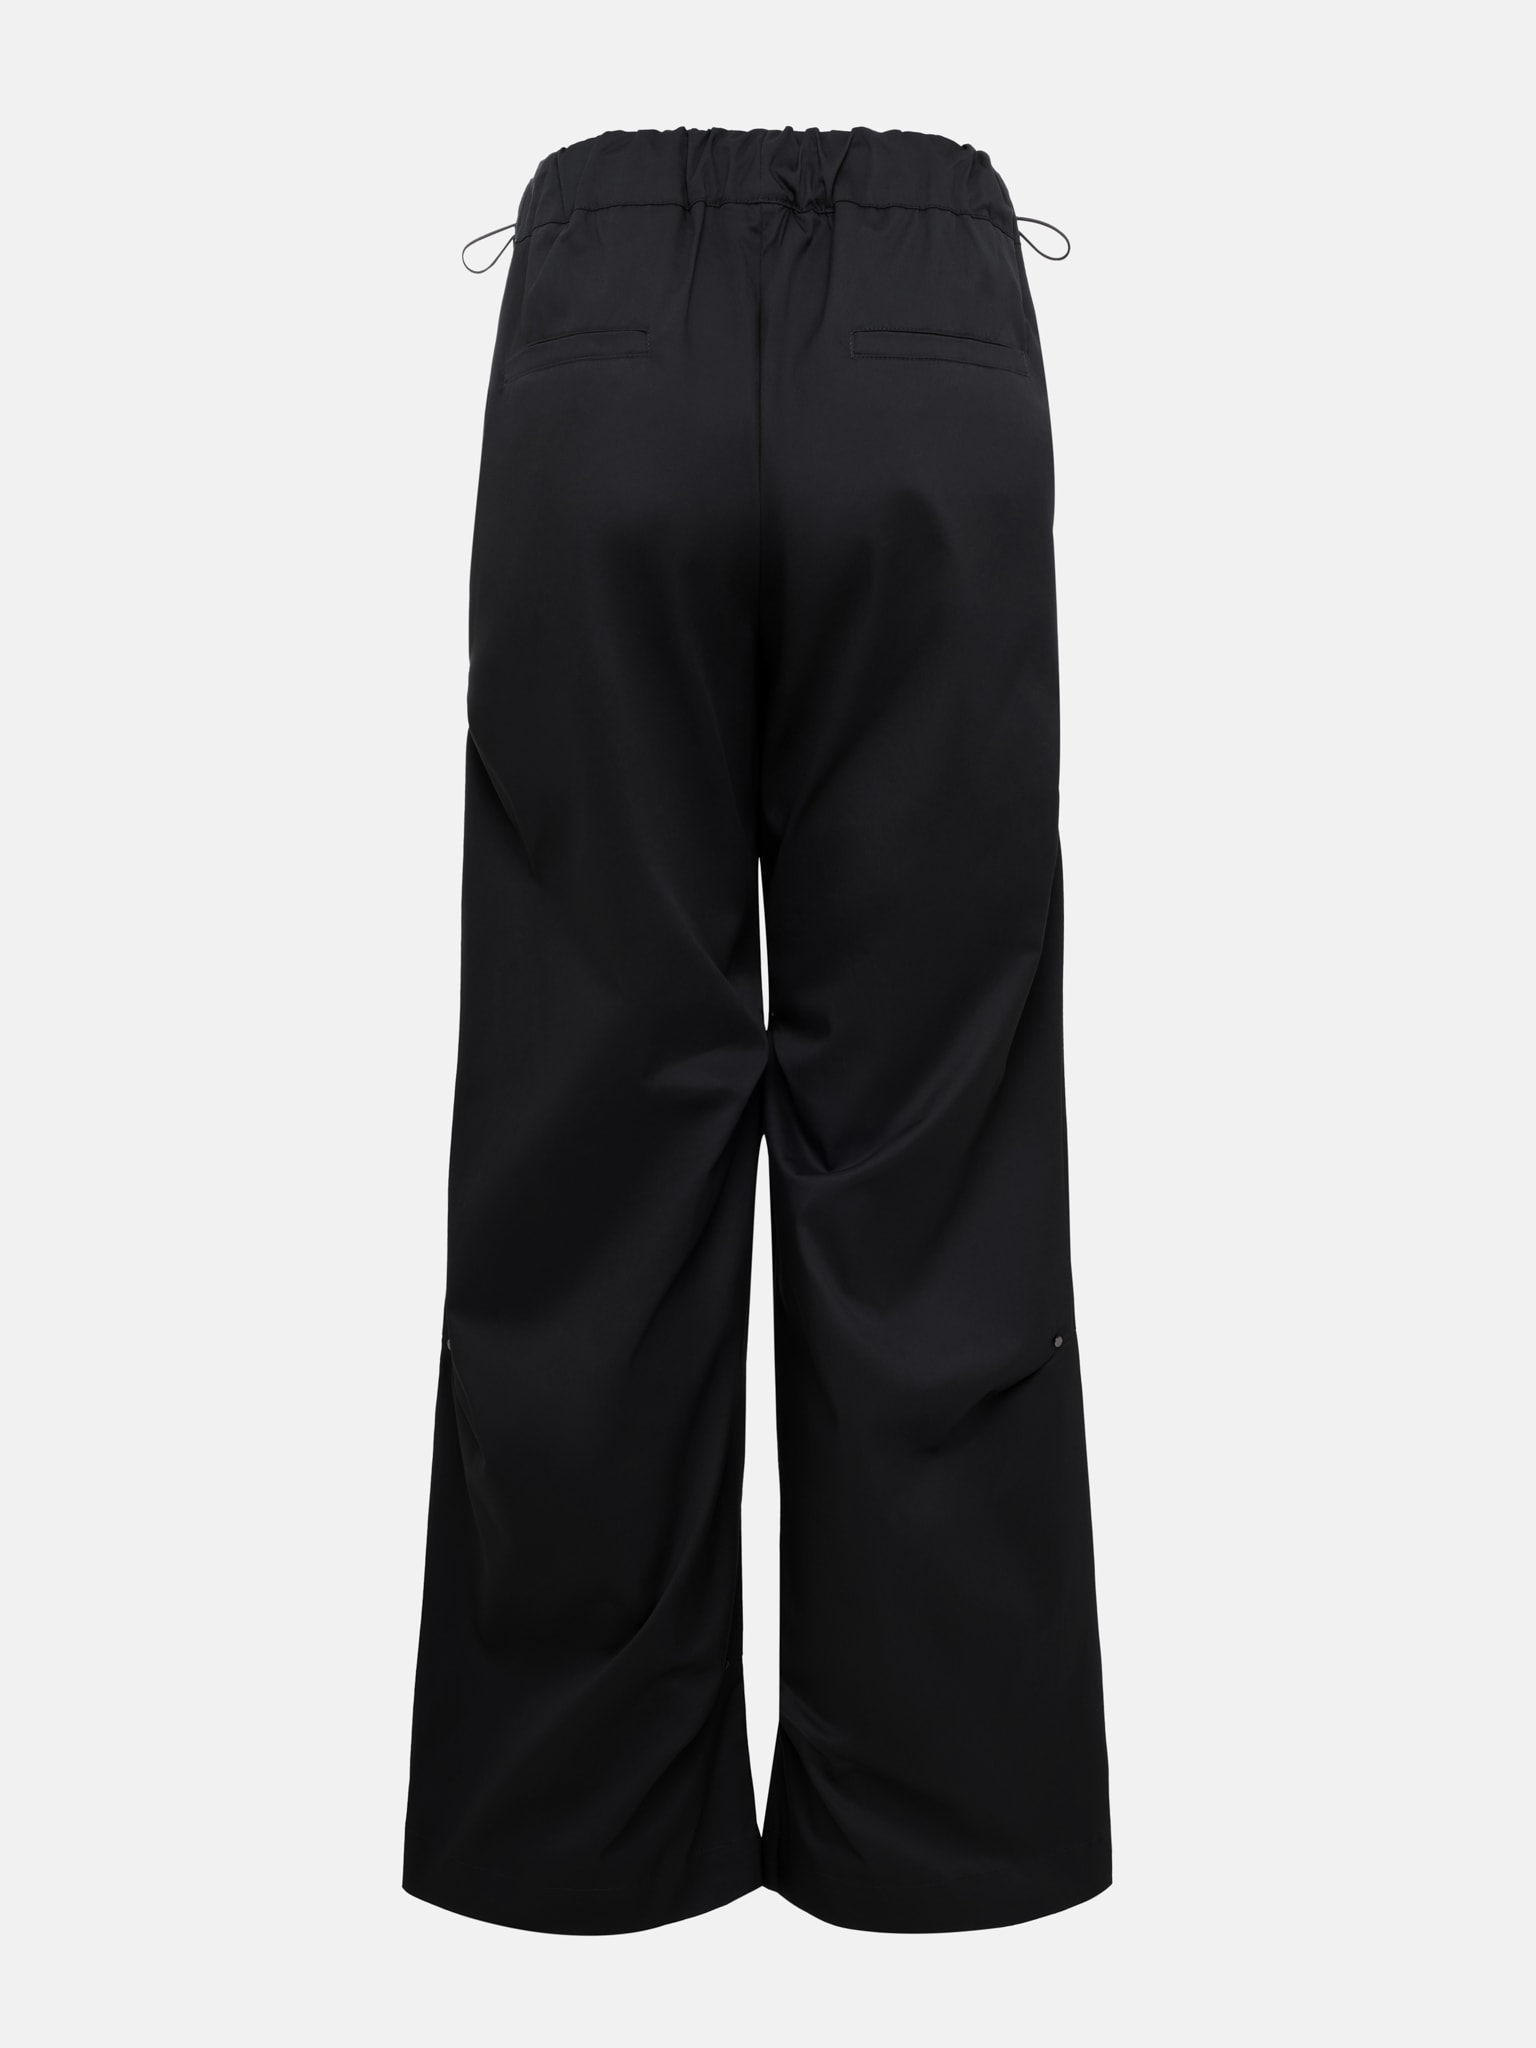 Loose trousers with waist drawstrings :: LICHI - Online fashion store